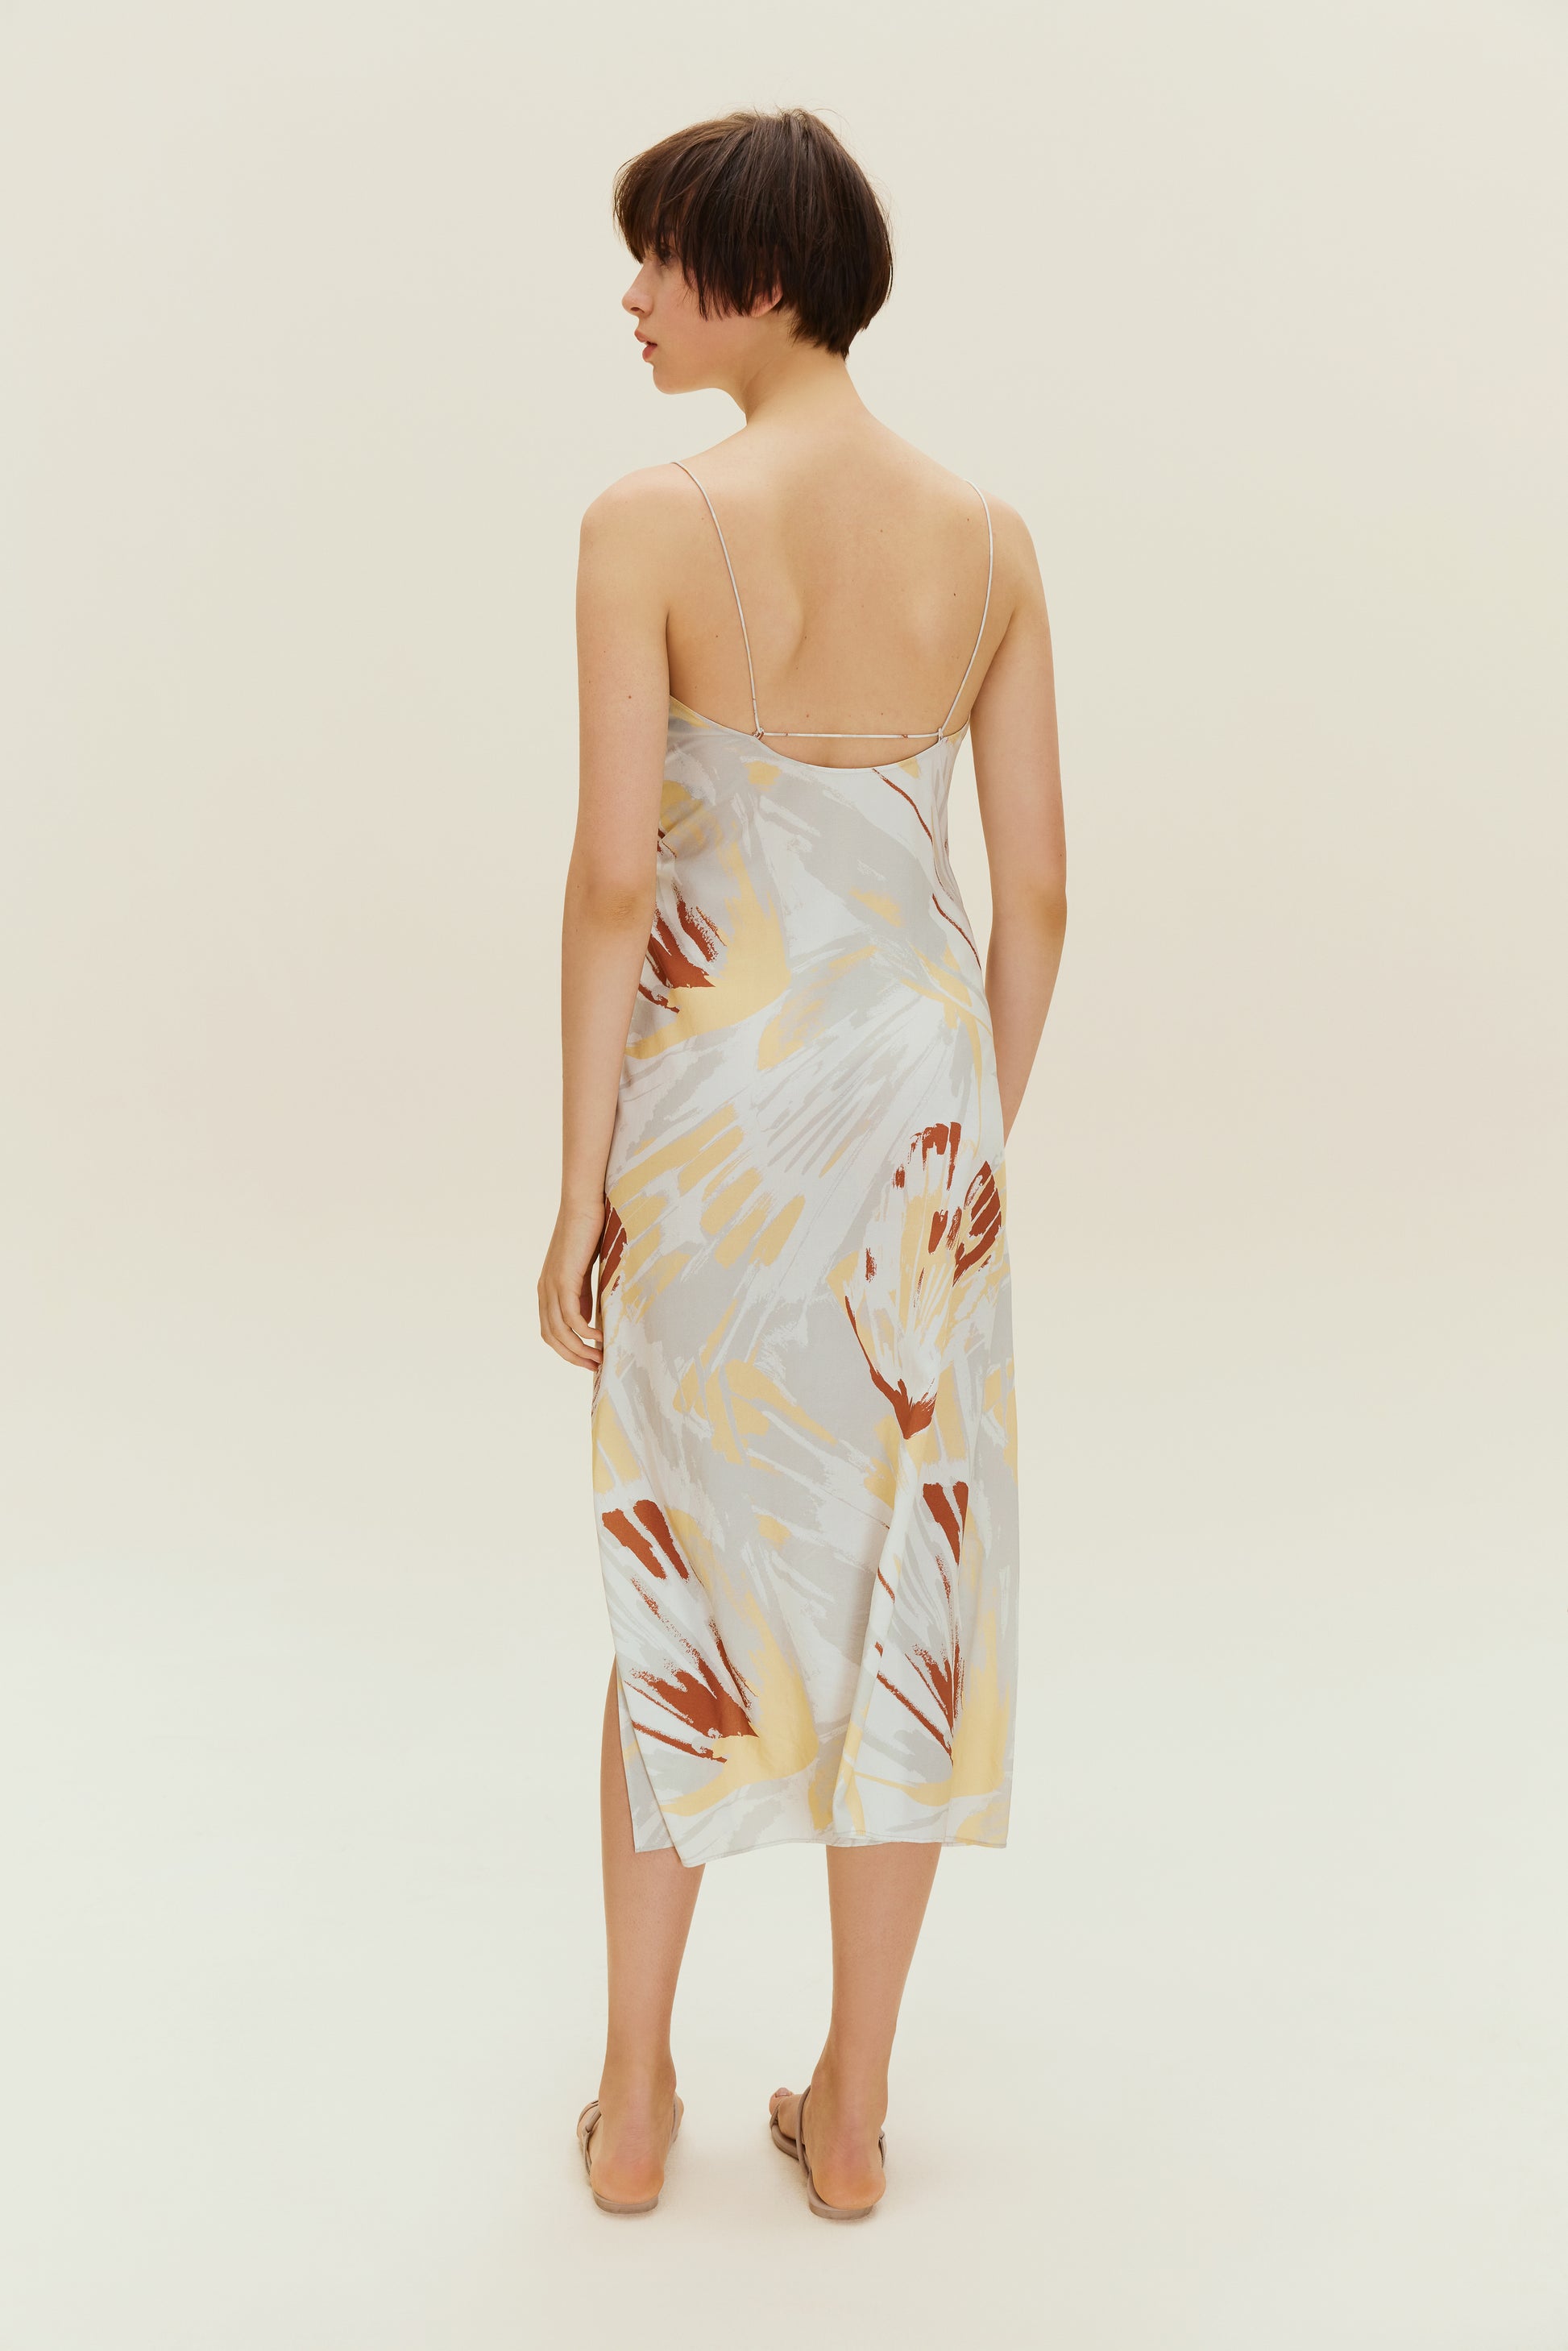 Back view of woman wearing spaghetti strap dress with brown, beige, white print